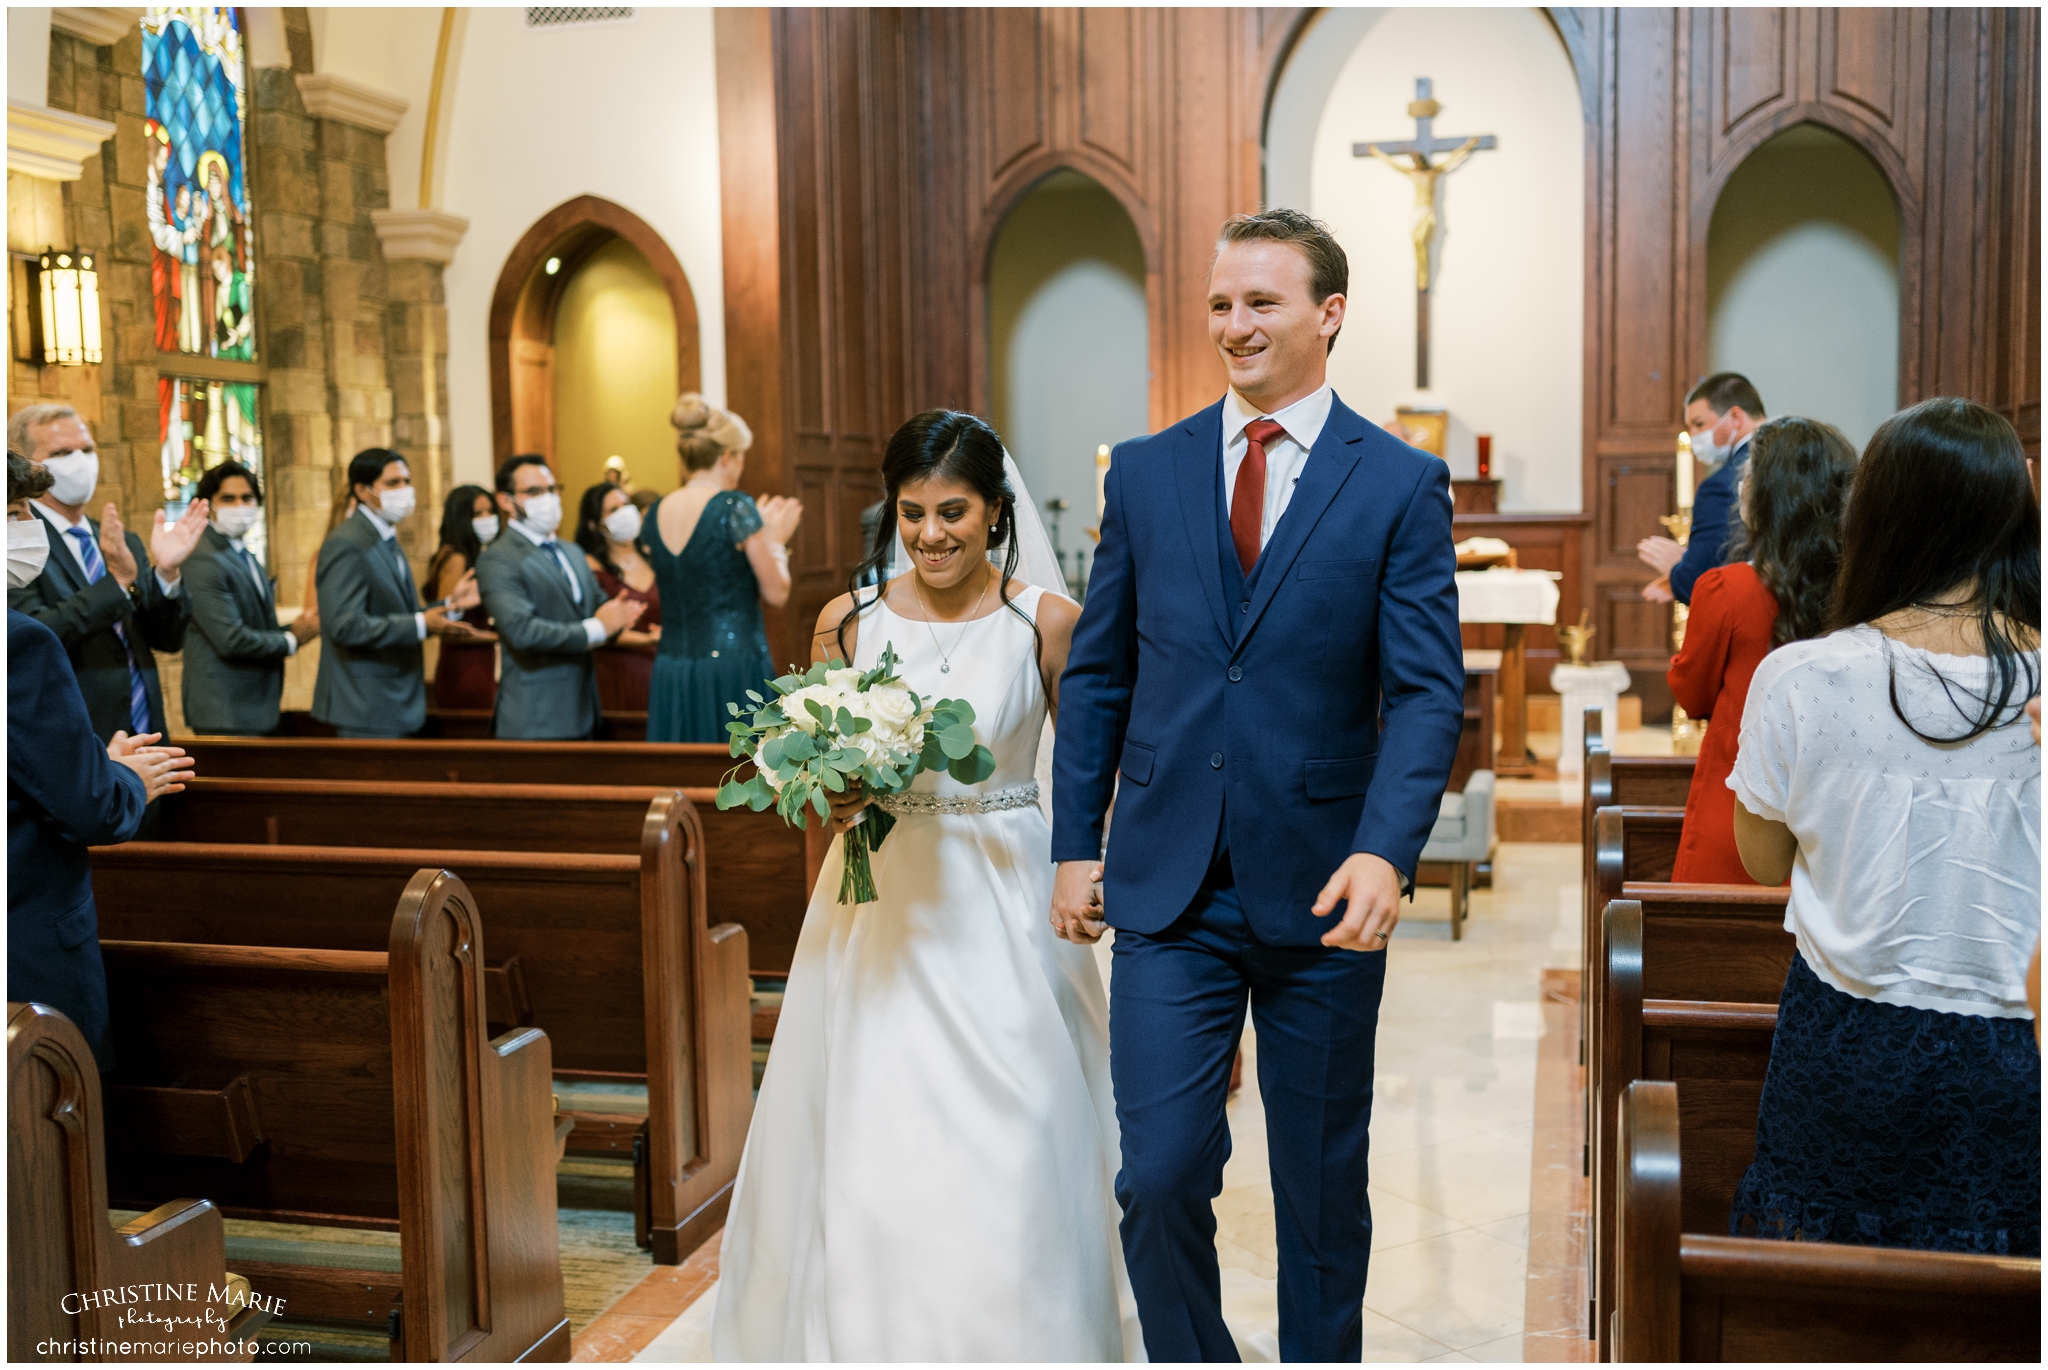 Bride and groom just married at St. Brendans Catholic Churc